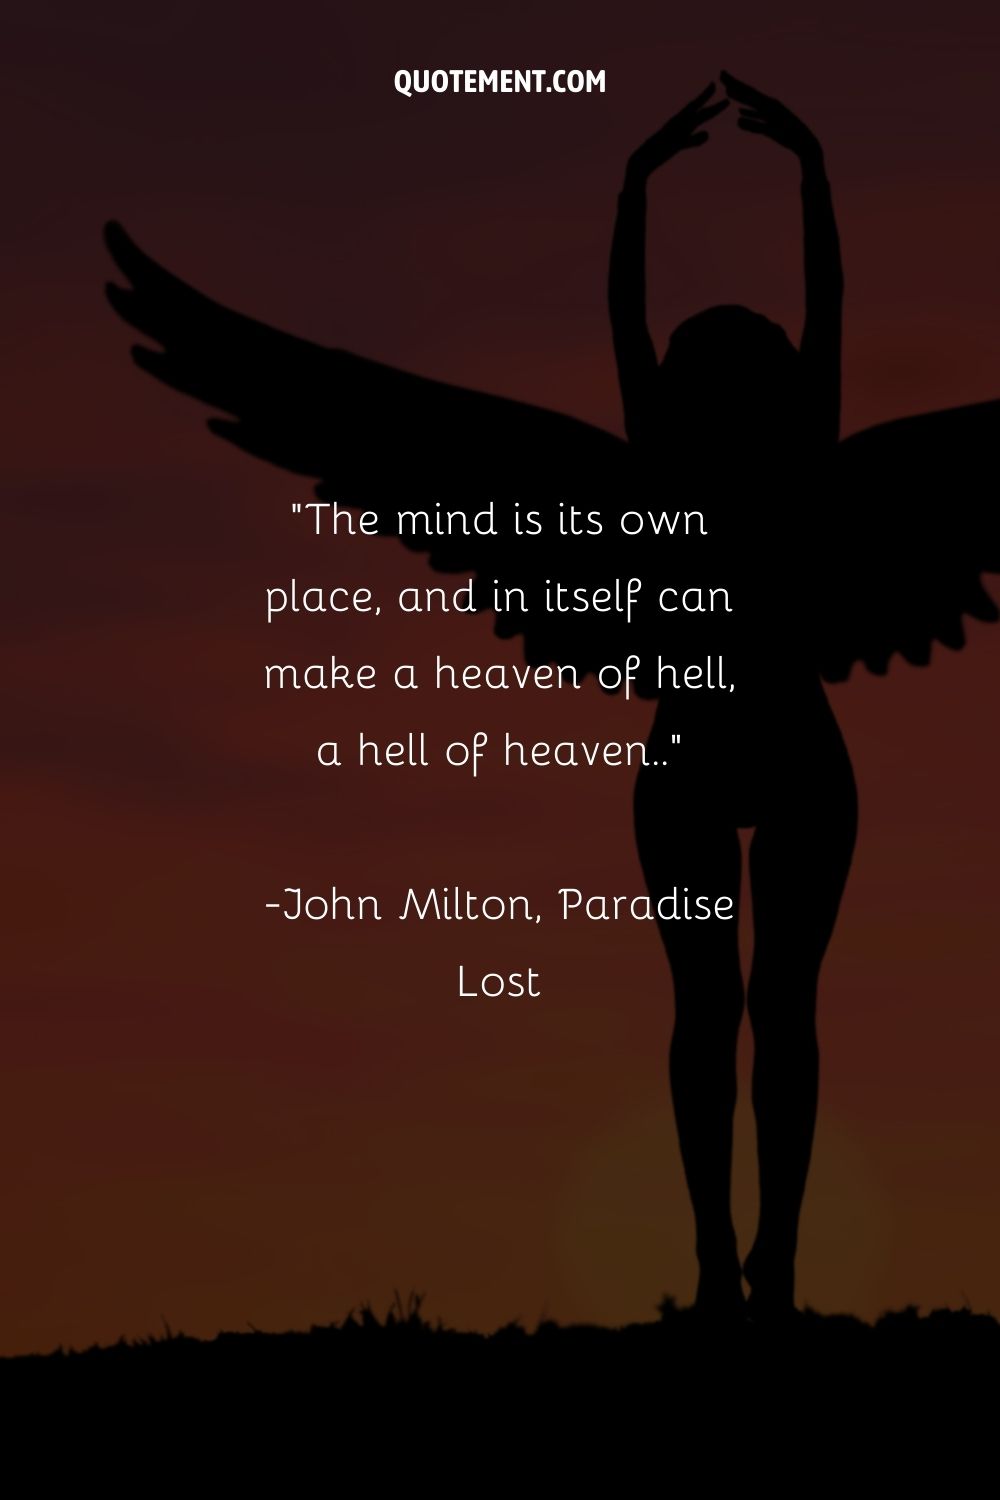 The mind is its own place, and in itself can make a heaven of hell, a hell of heaven